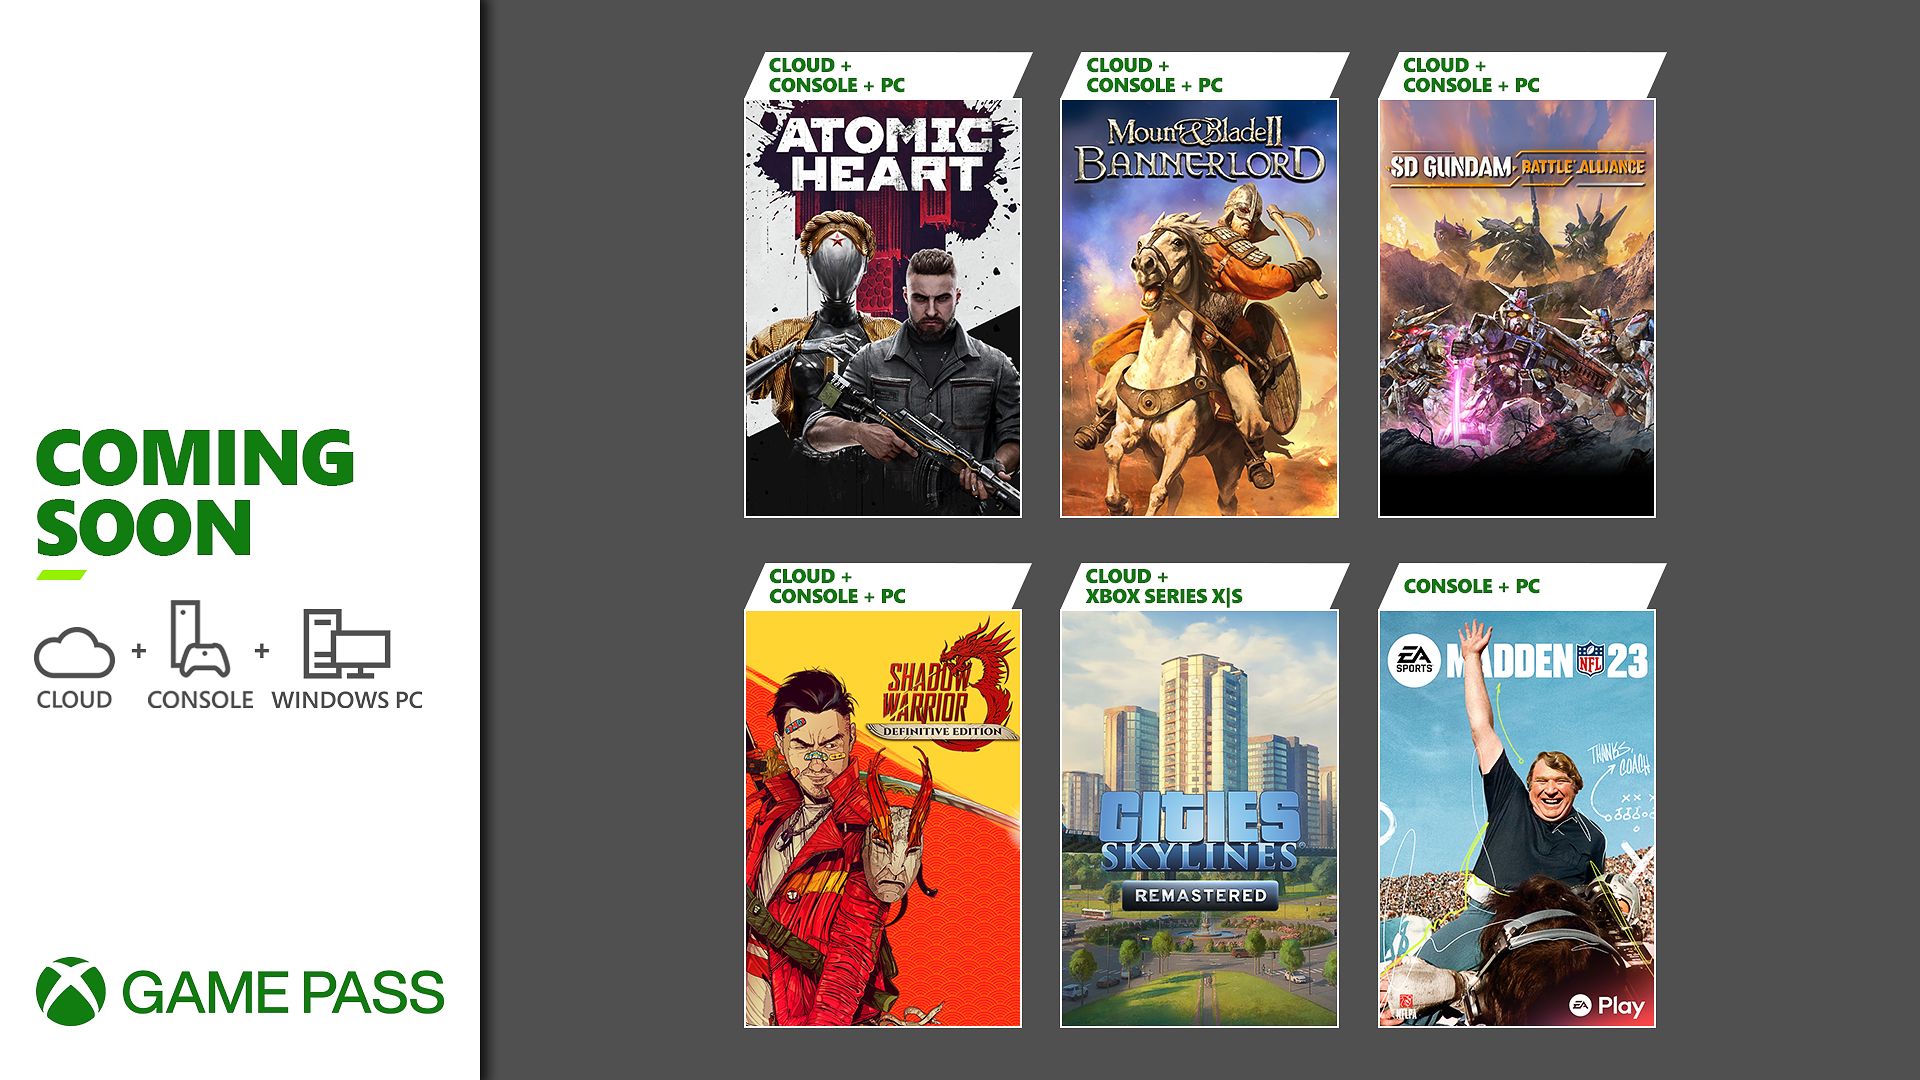 Coming Soon to Xbox Game Pass: Atomic Heart, Mount & Blade II: Bannerlord, Shadow Warrior 3: Definitive Edition, and More